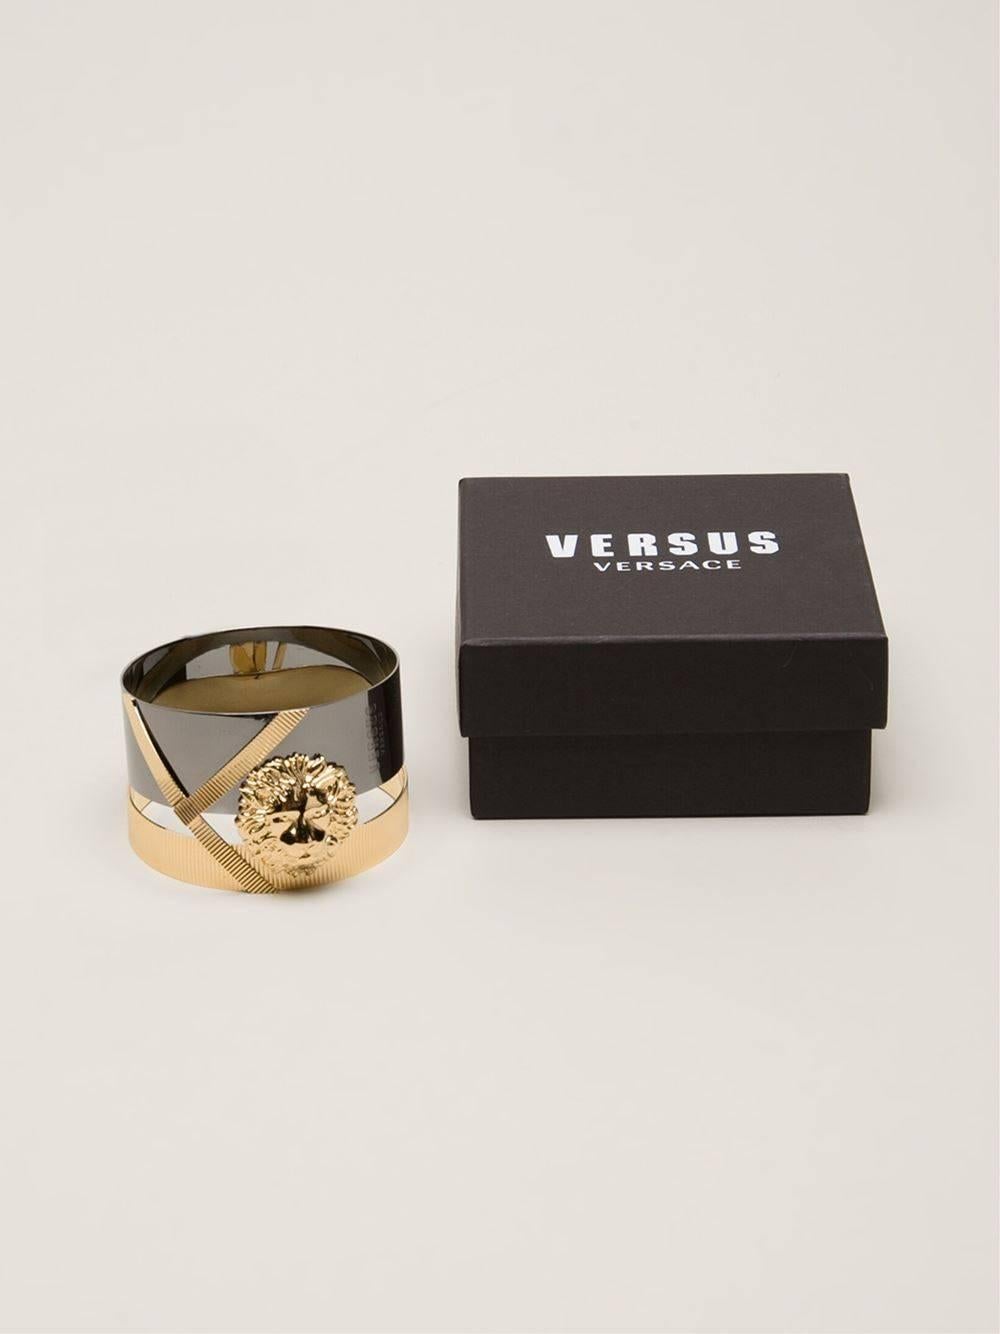 VERSACE

Anthony Vaccarello X Versus Versace 

Cuff bracelet
 
A definitely cool accessory.

Two tone cuff bracelet with gold tone lion detailing and delicate logo embellishment. 


Size selection: One size. 

100% metal.

Made in Italy

New, with